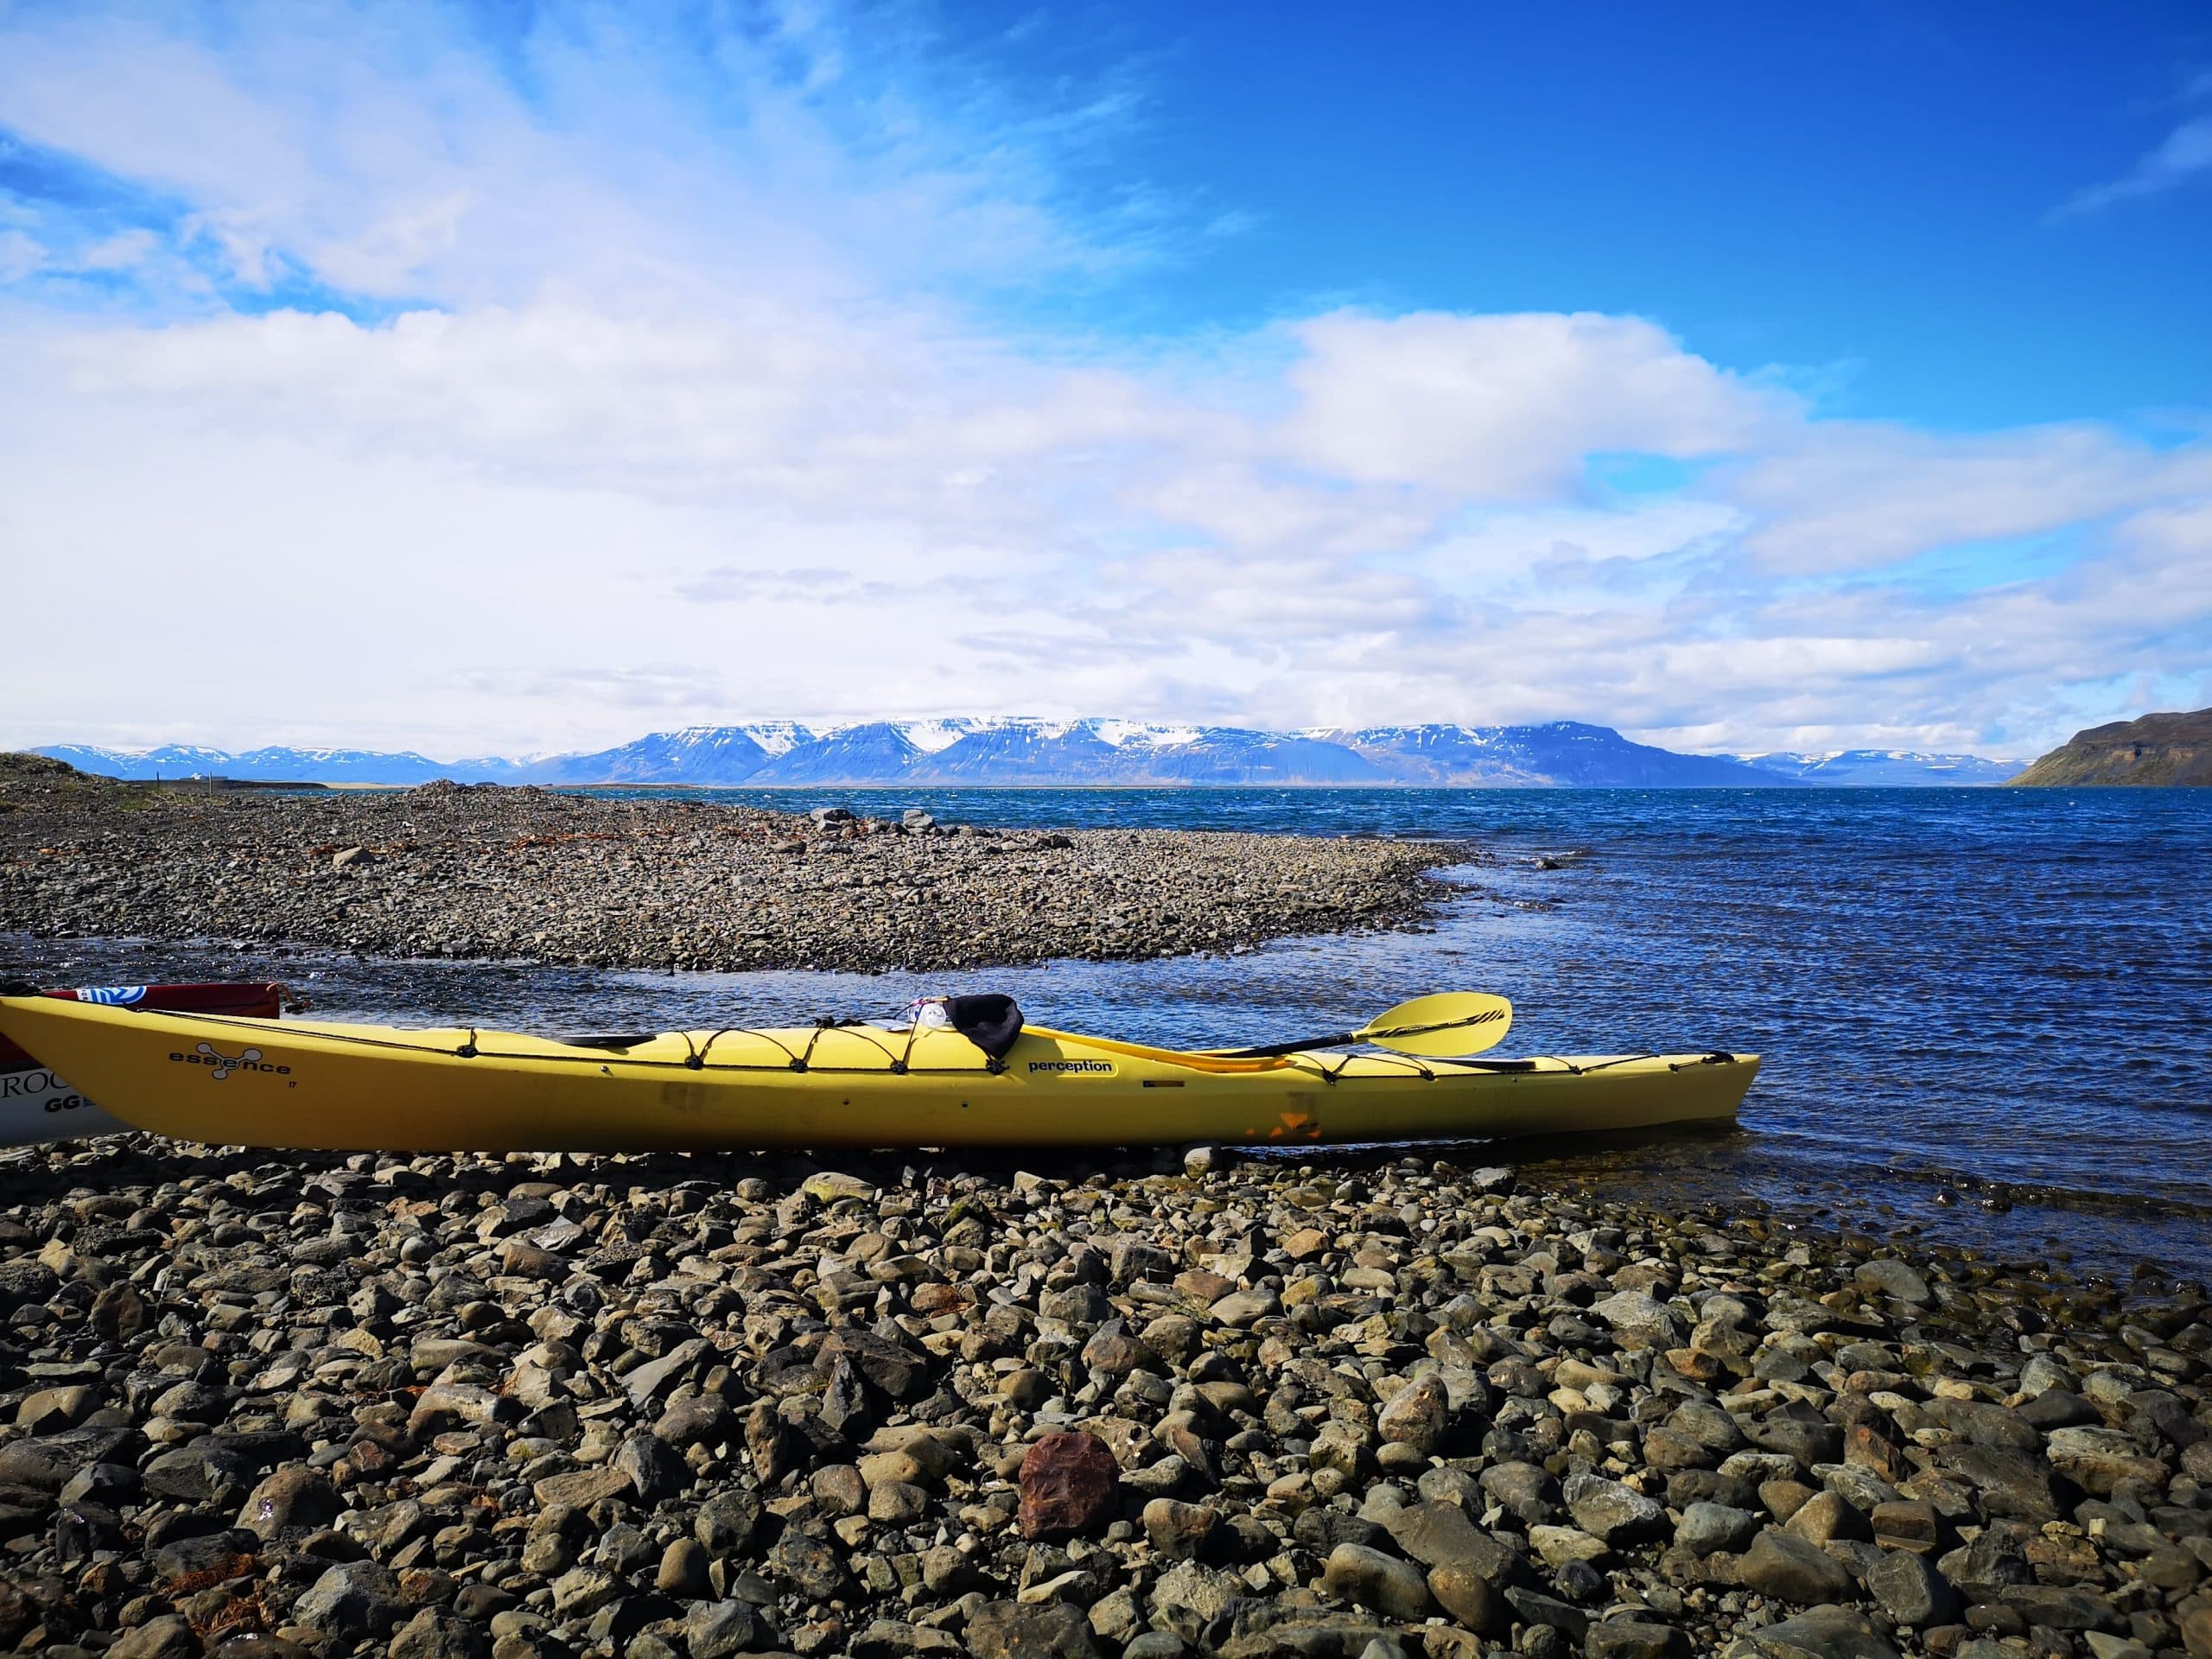 A view of a kayak on a beach, North Iceland's mountains in the background.